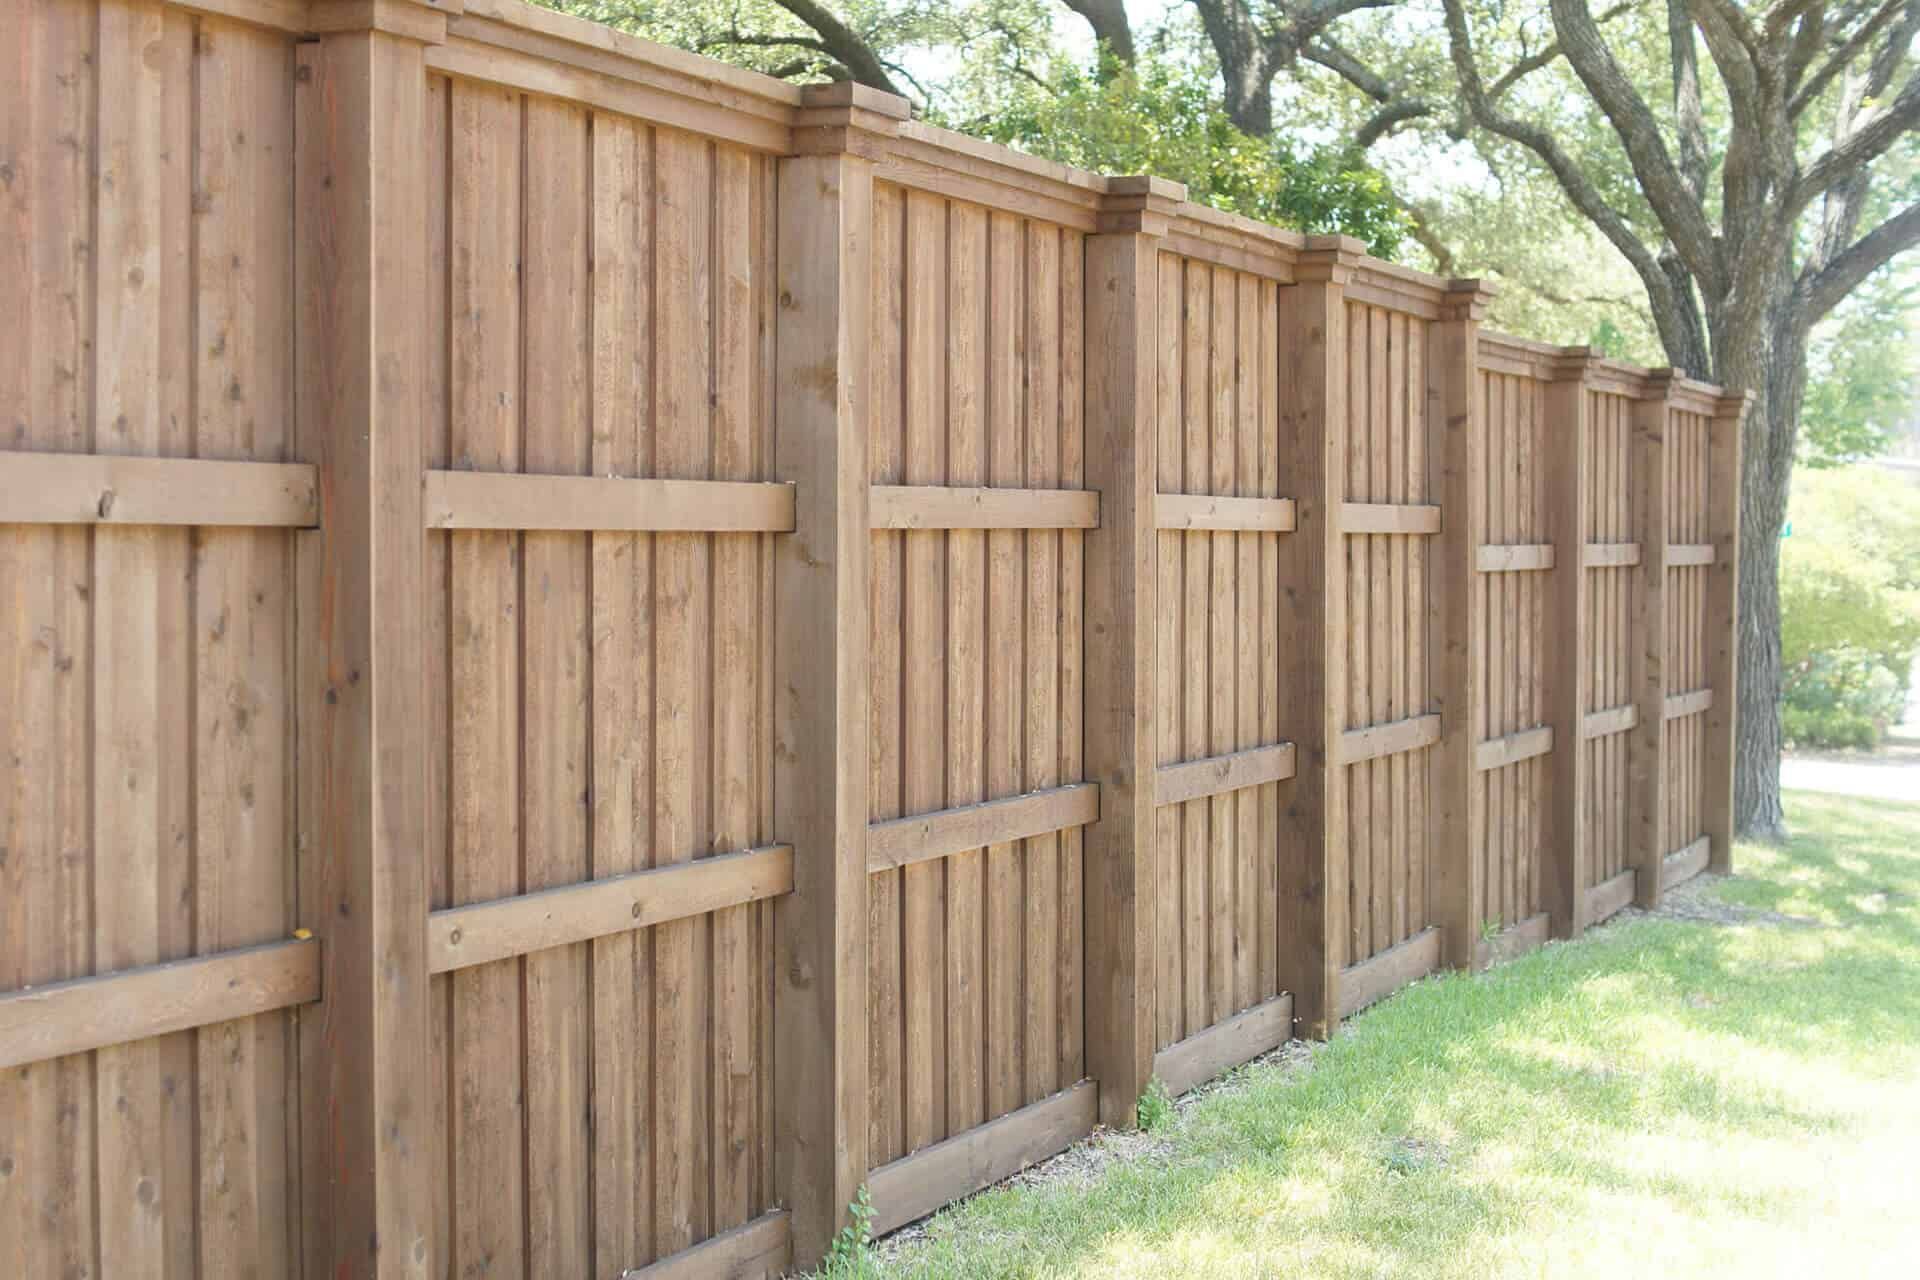 Ace Fence Company Austin – Your Top Choice for Fence Replacement & Installation Services